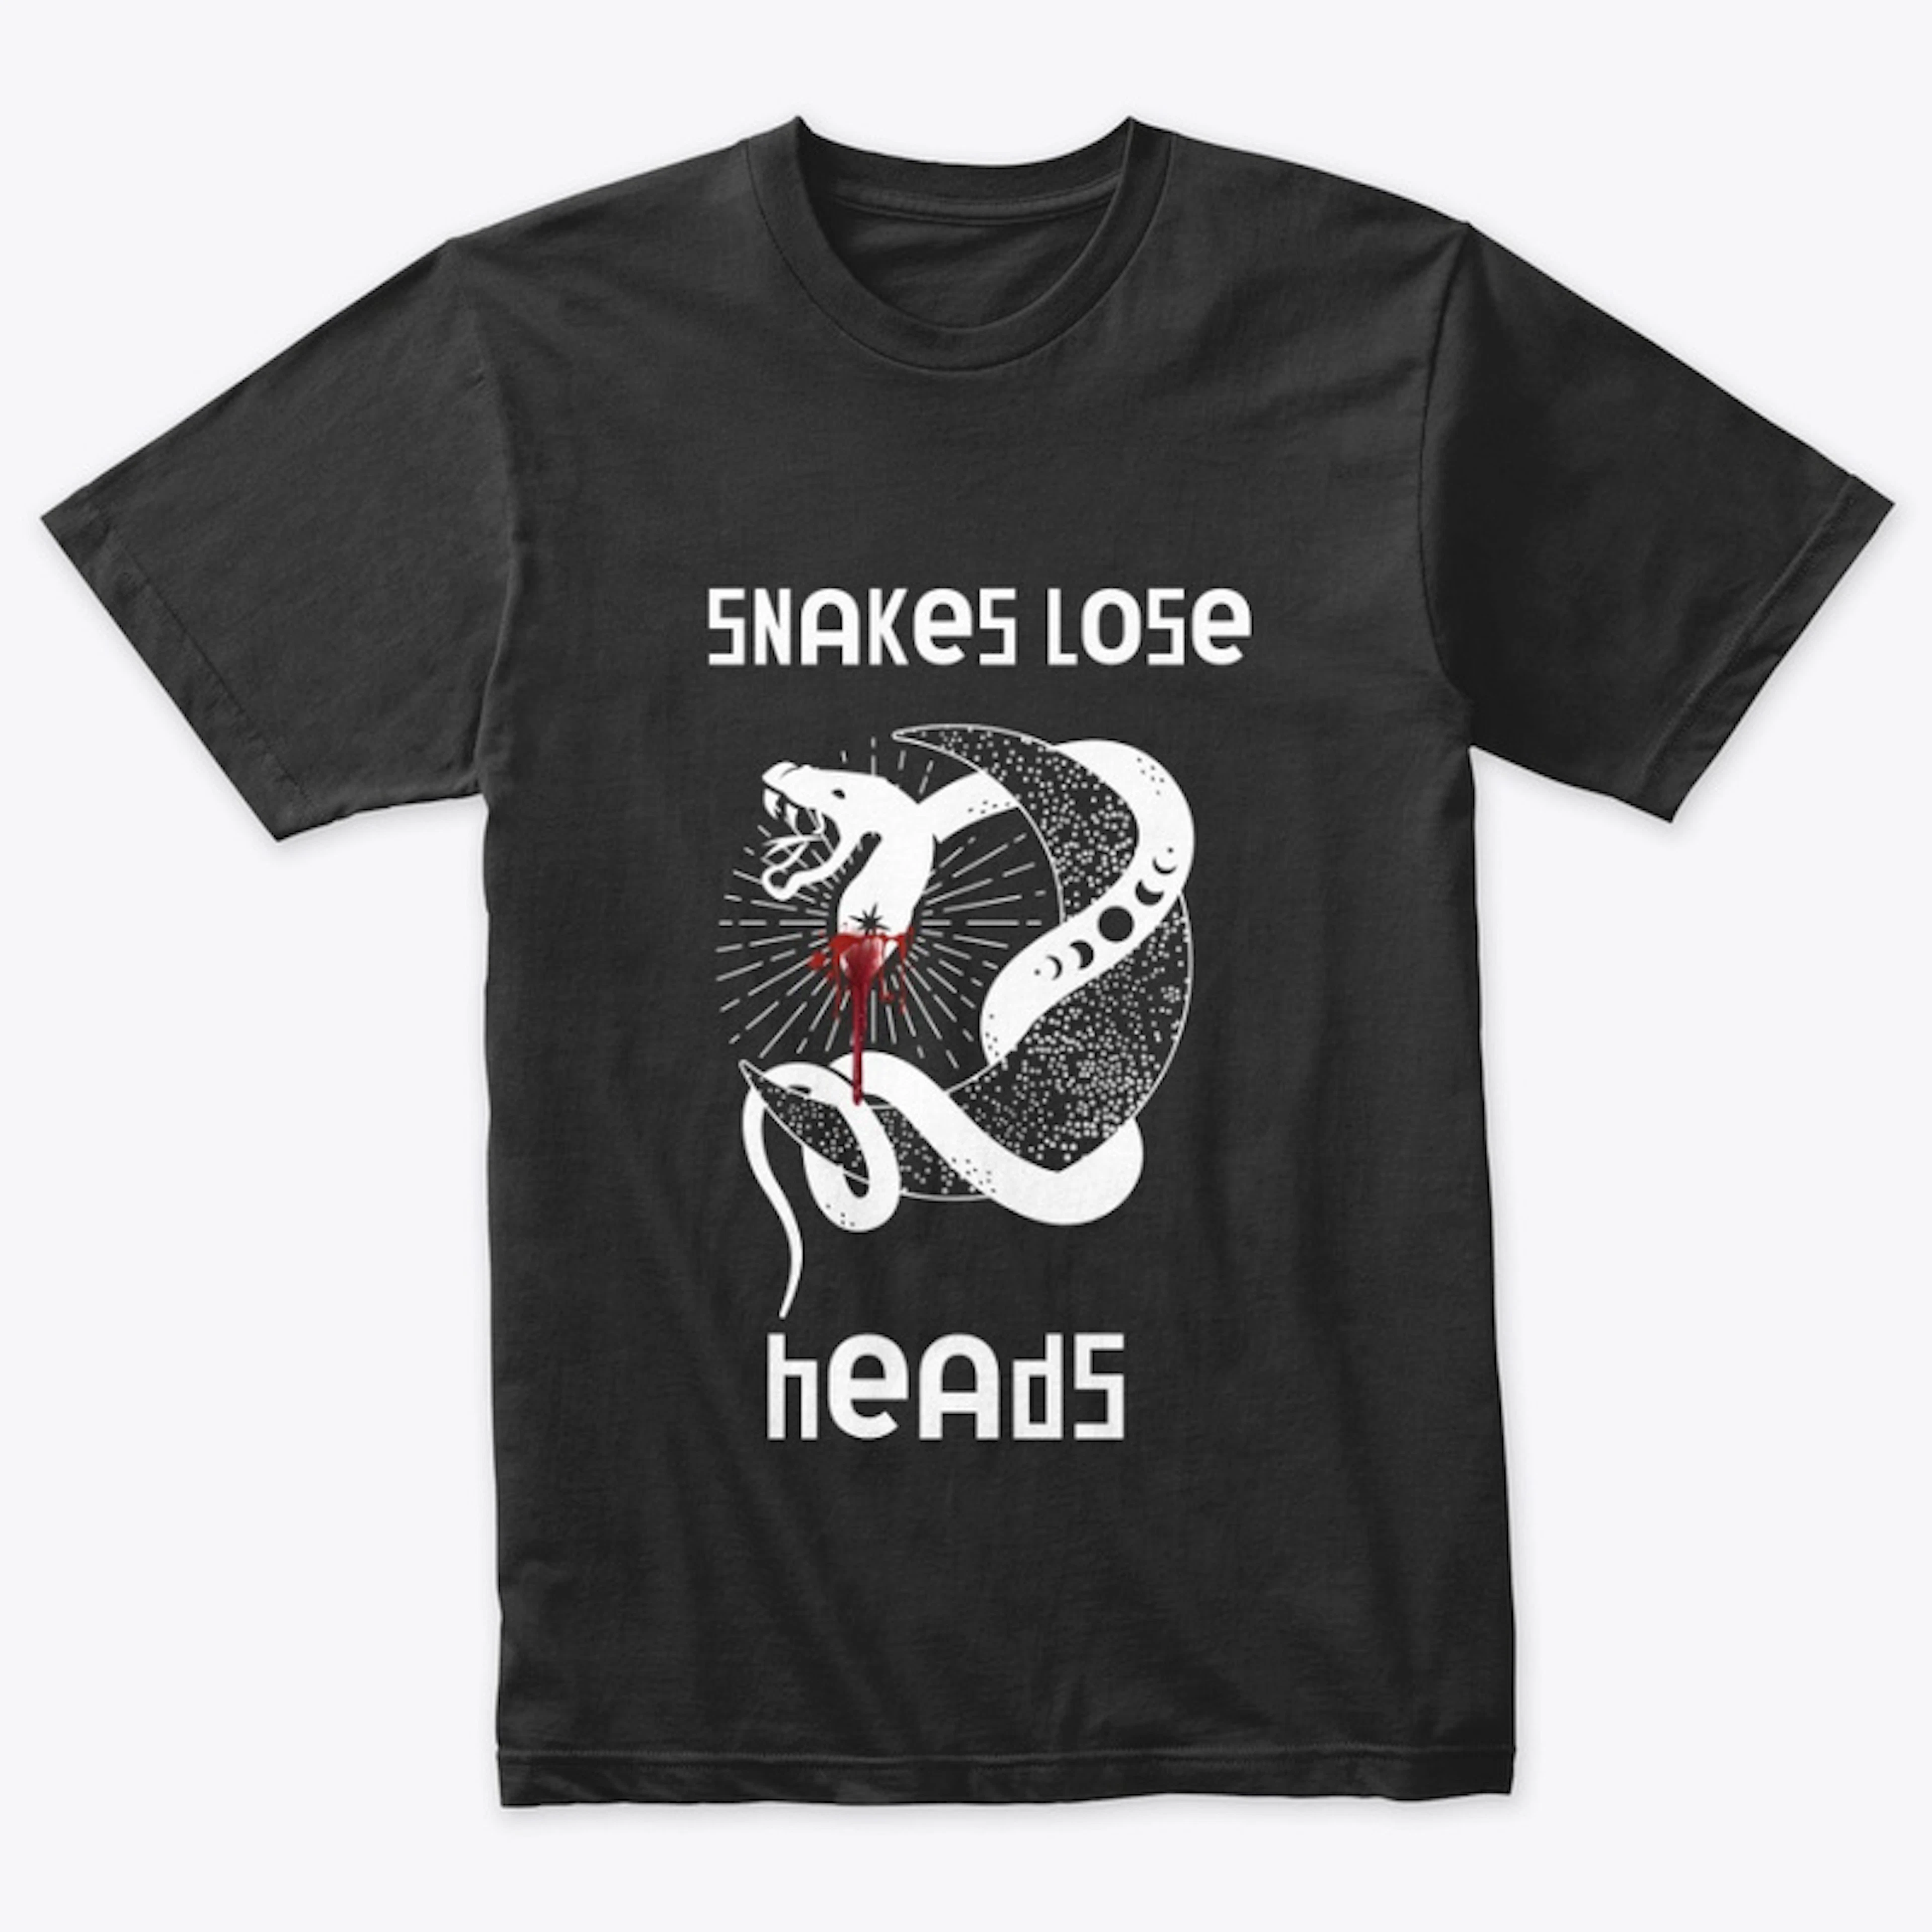 Snakes lose heads